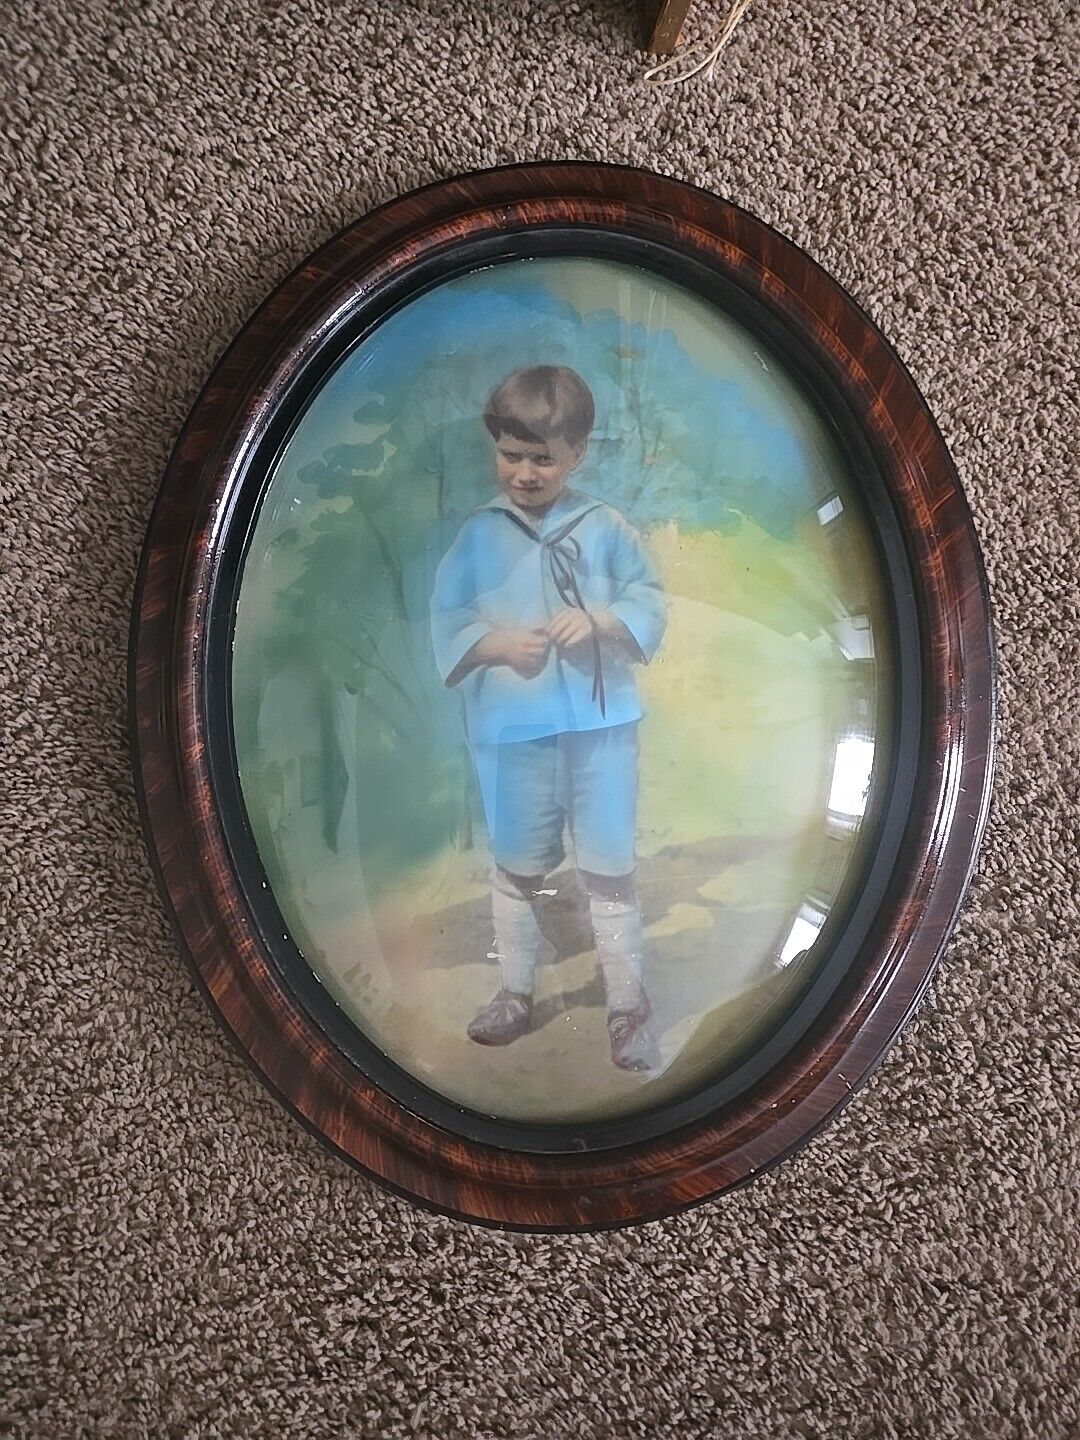 Antique Oval Convex Glass Picture Tiger Wood Faux ? Frame. Little Boy In Blue